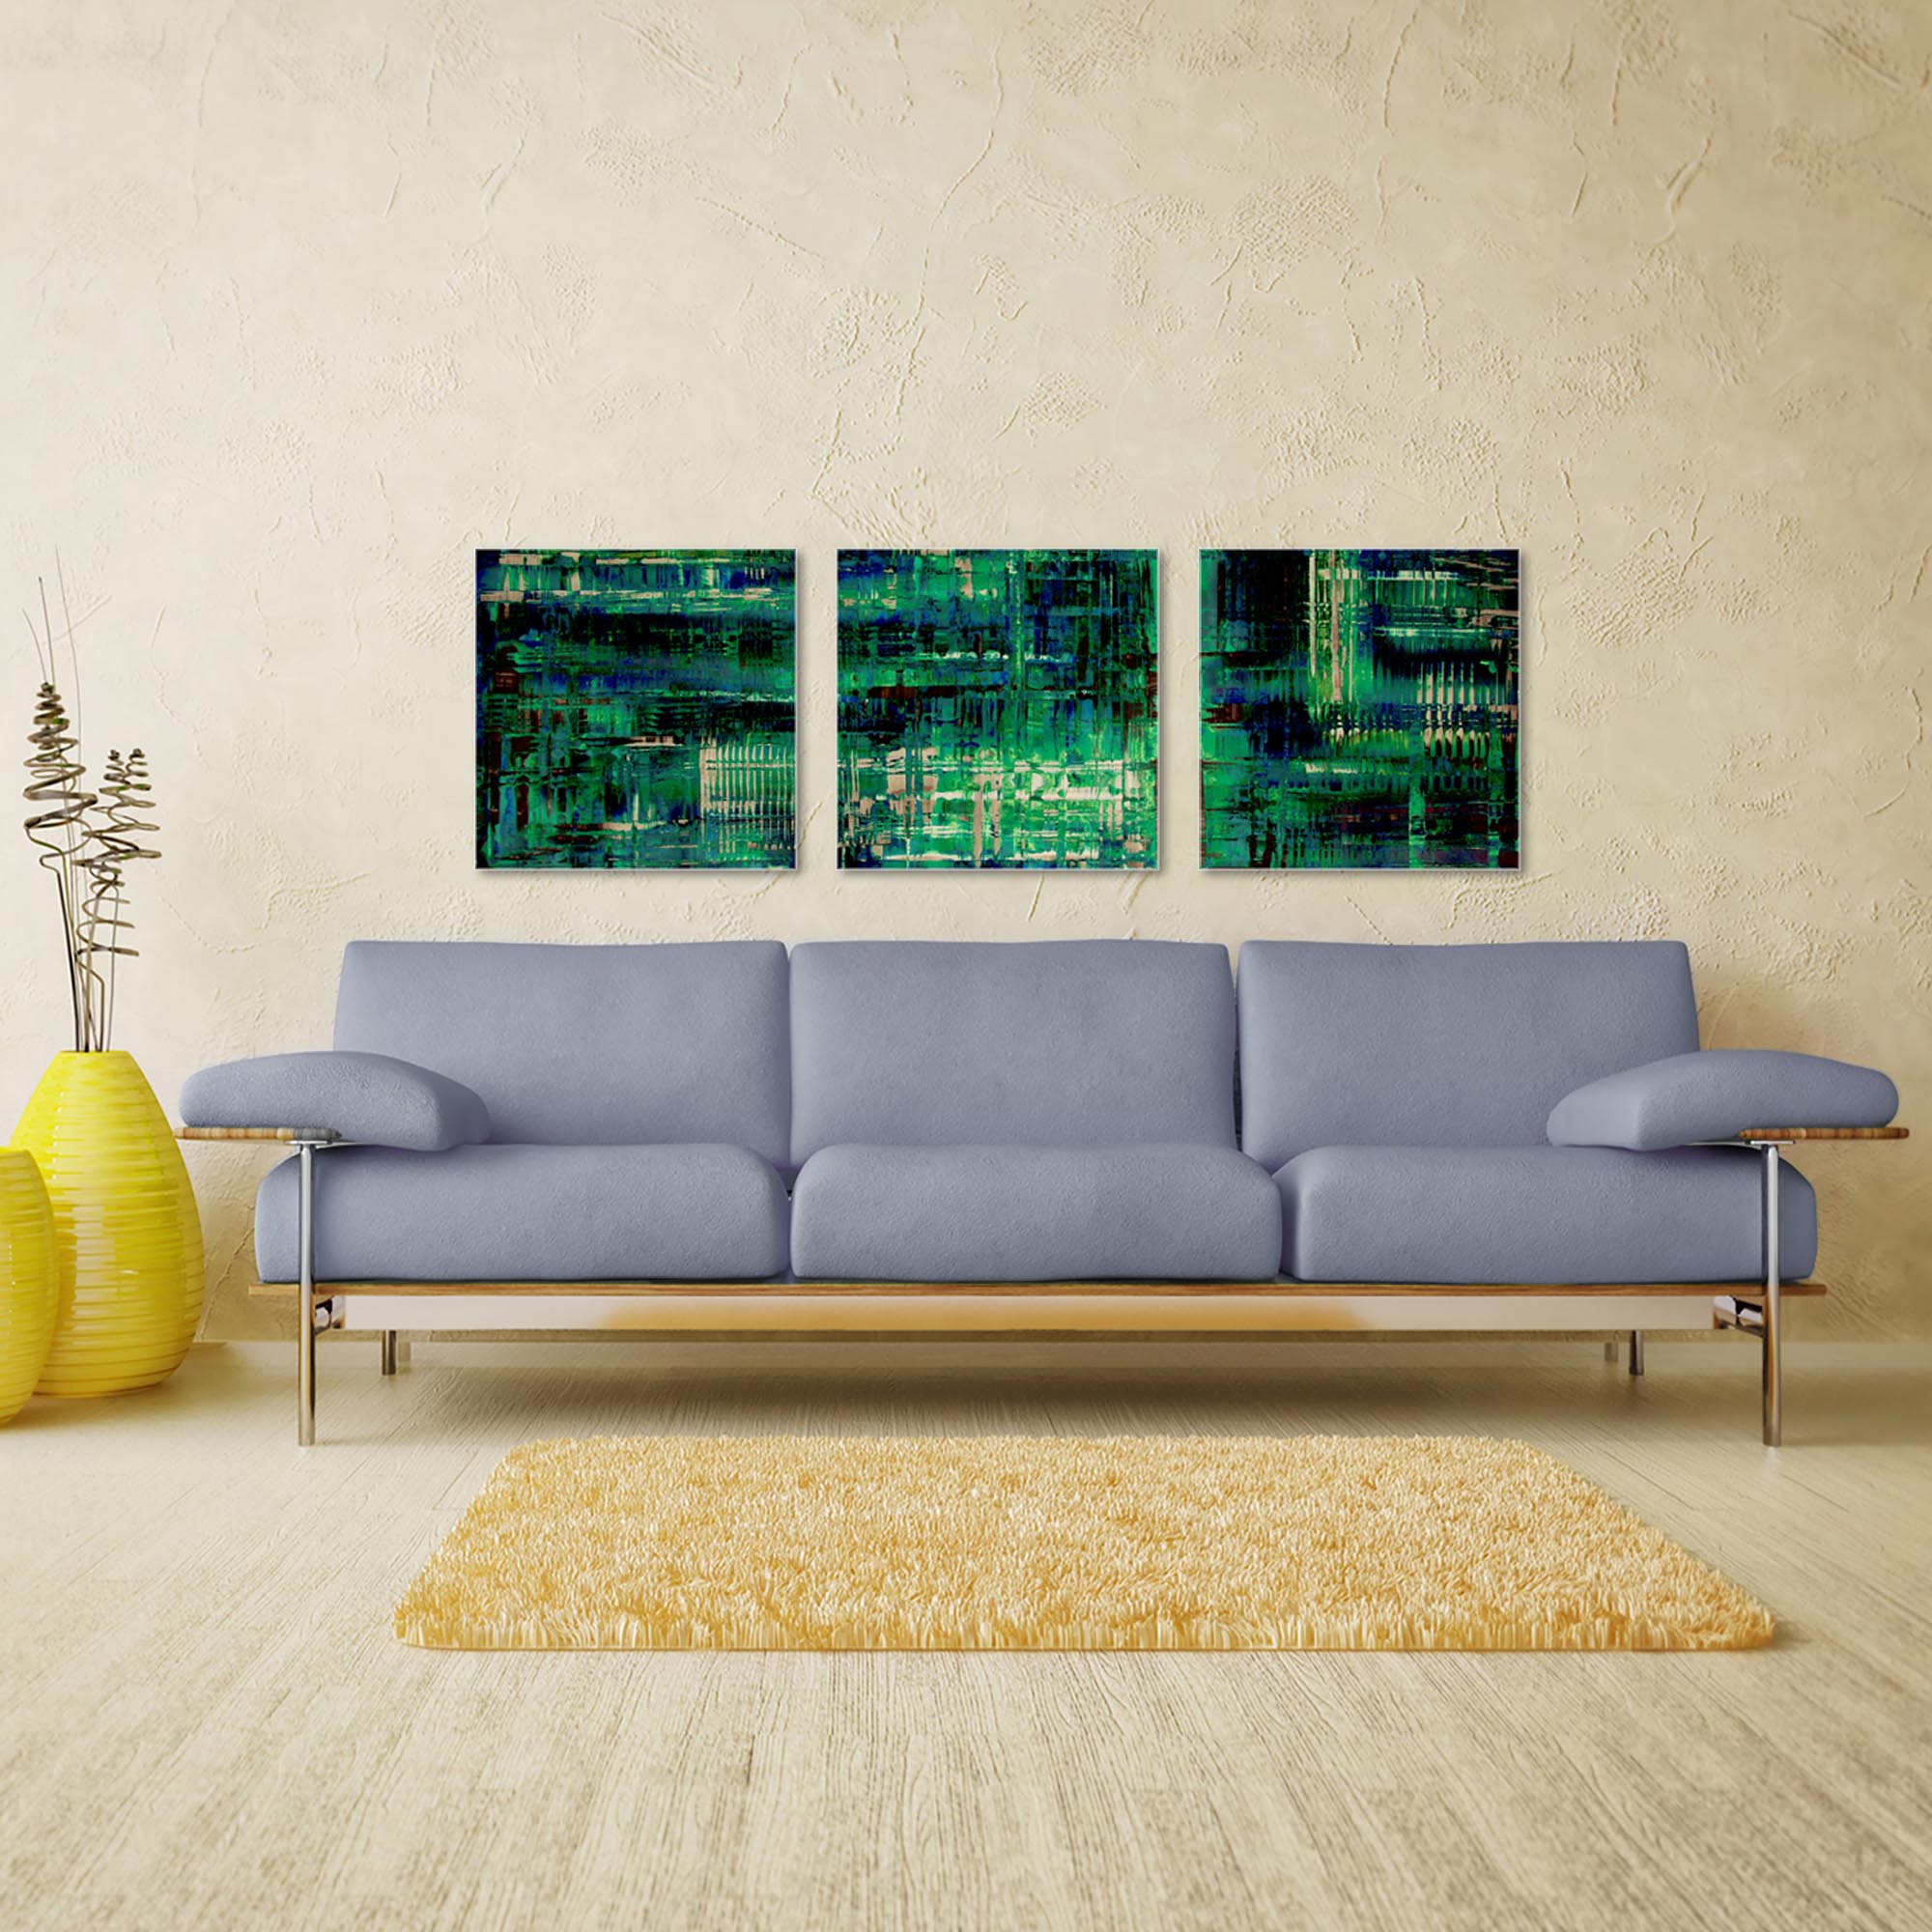 Aporia Blue Triptych Large 70x22in. Metal or Acrylic Contemporary Decor - Image 3